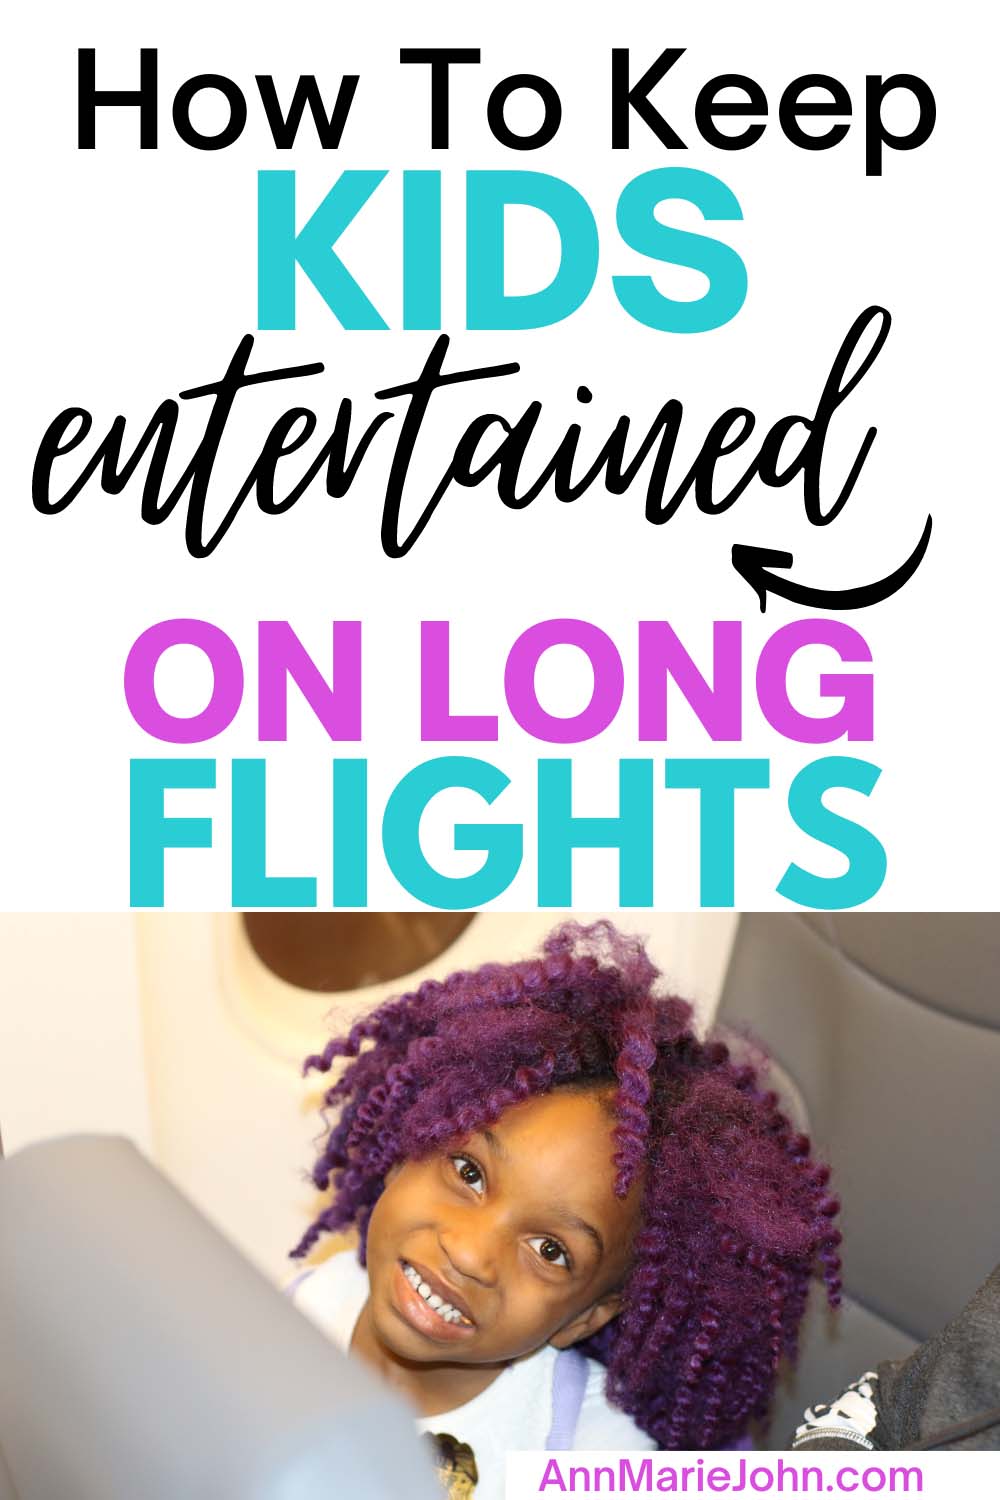 How to Keep Your Kids Entertained on Long Flights